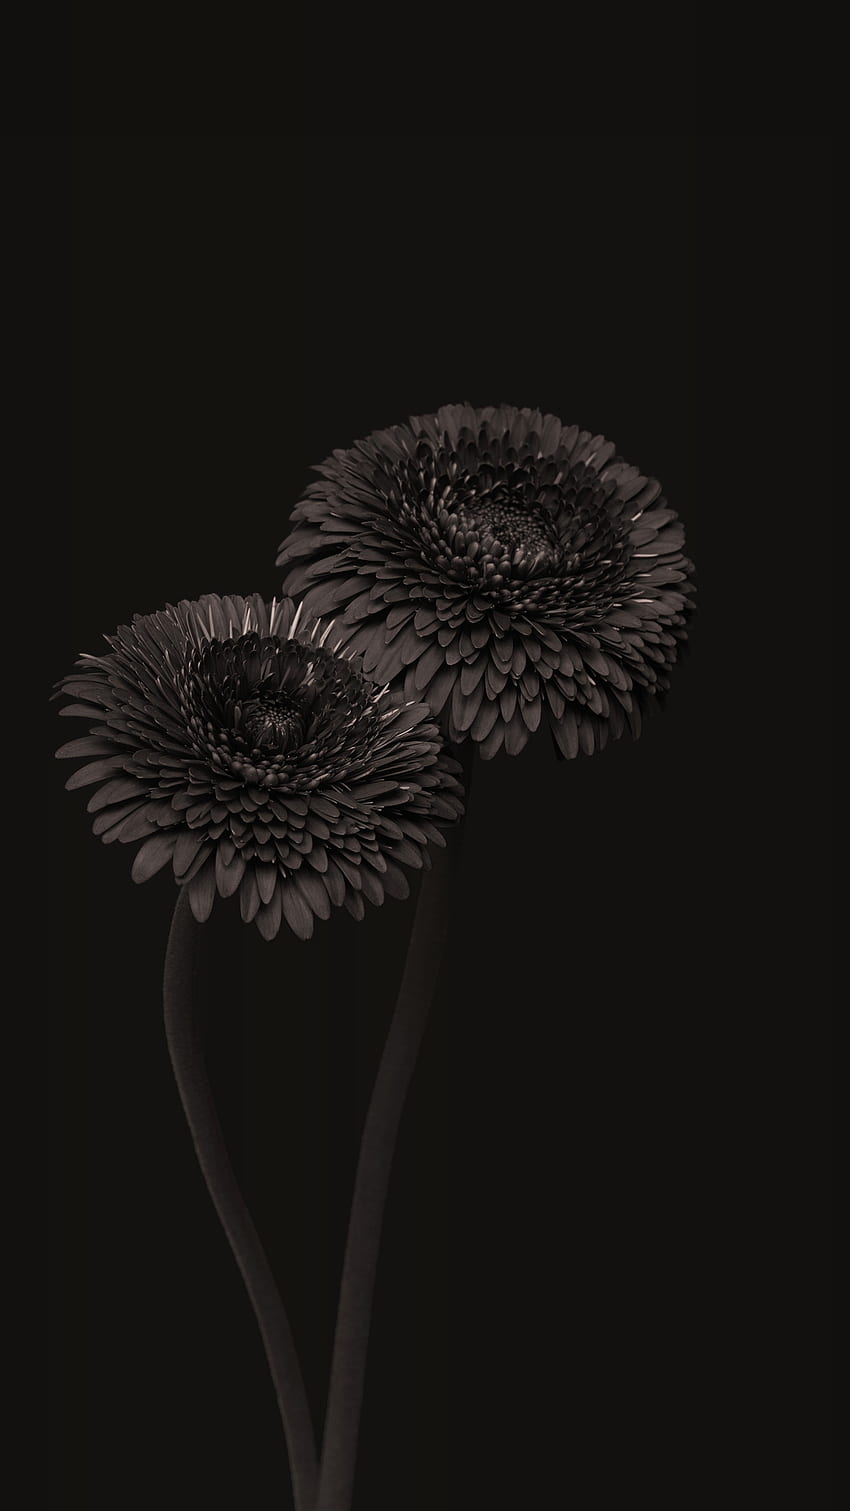 100+] Black And White Flower Wallpapers | Wallpapers.com